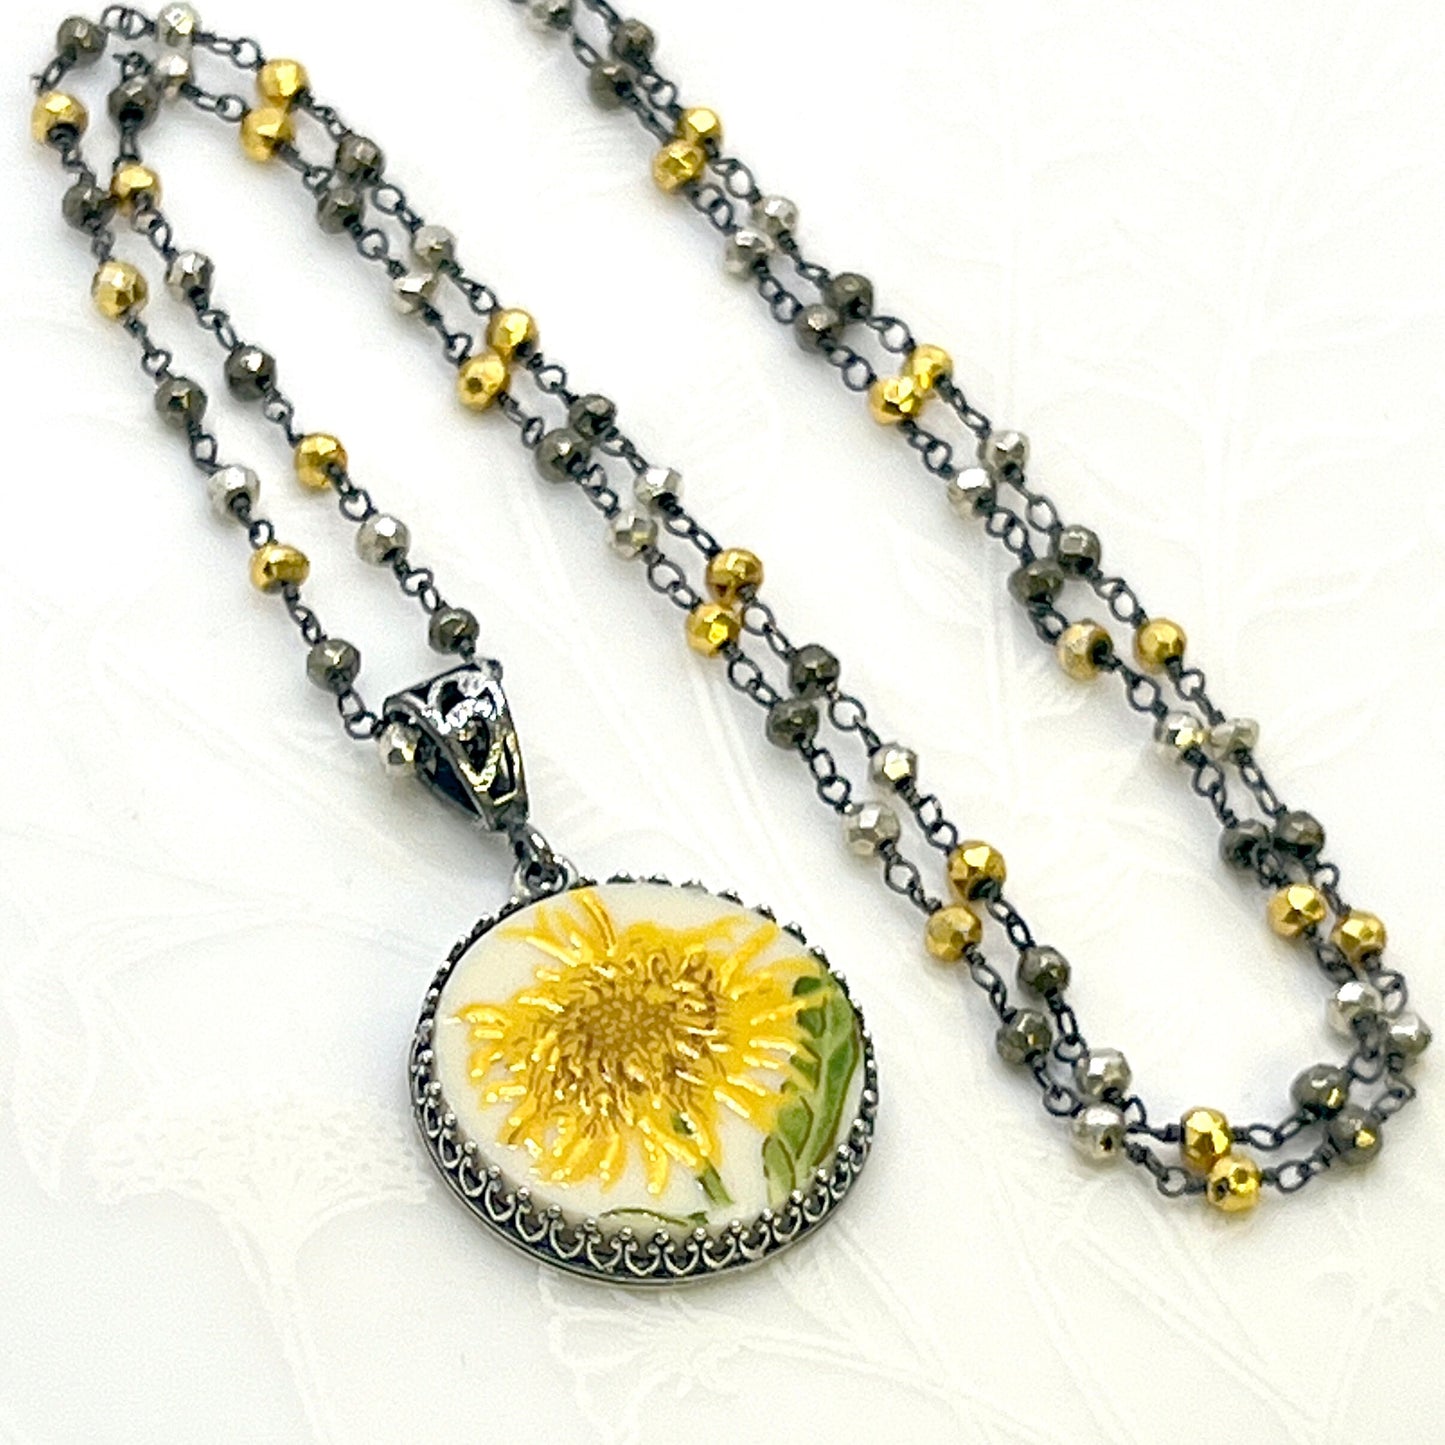 Irish Belleek China, Hand Painted Yellow Flower, Sunflower Broken China Necklace, Sterling Silver and Pyrite Jewelry, Unique Gifts for Women